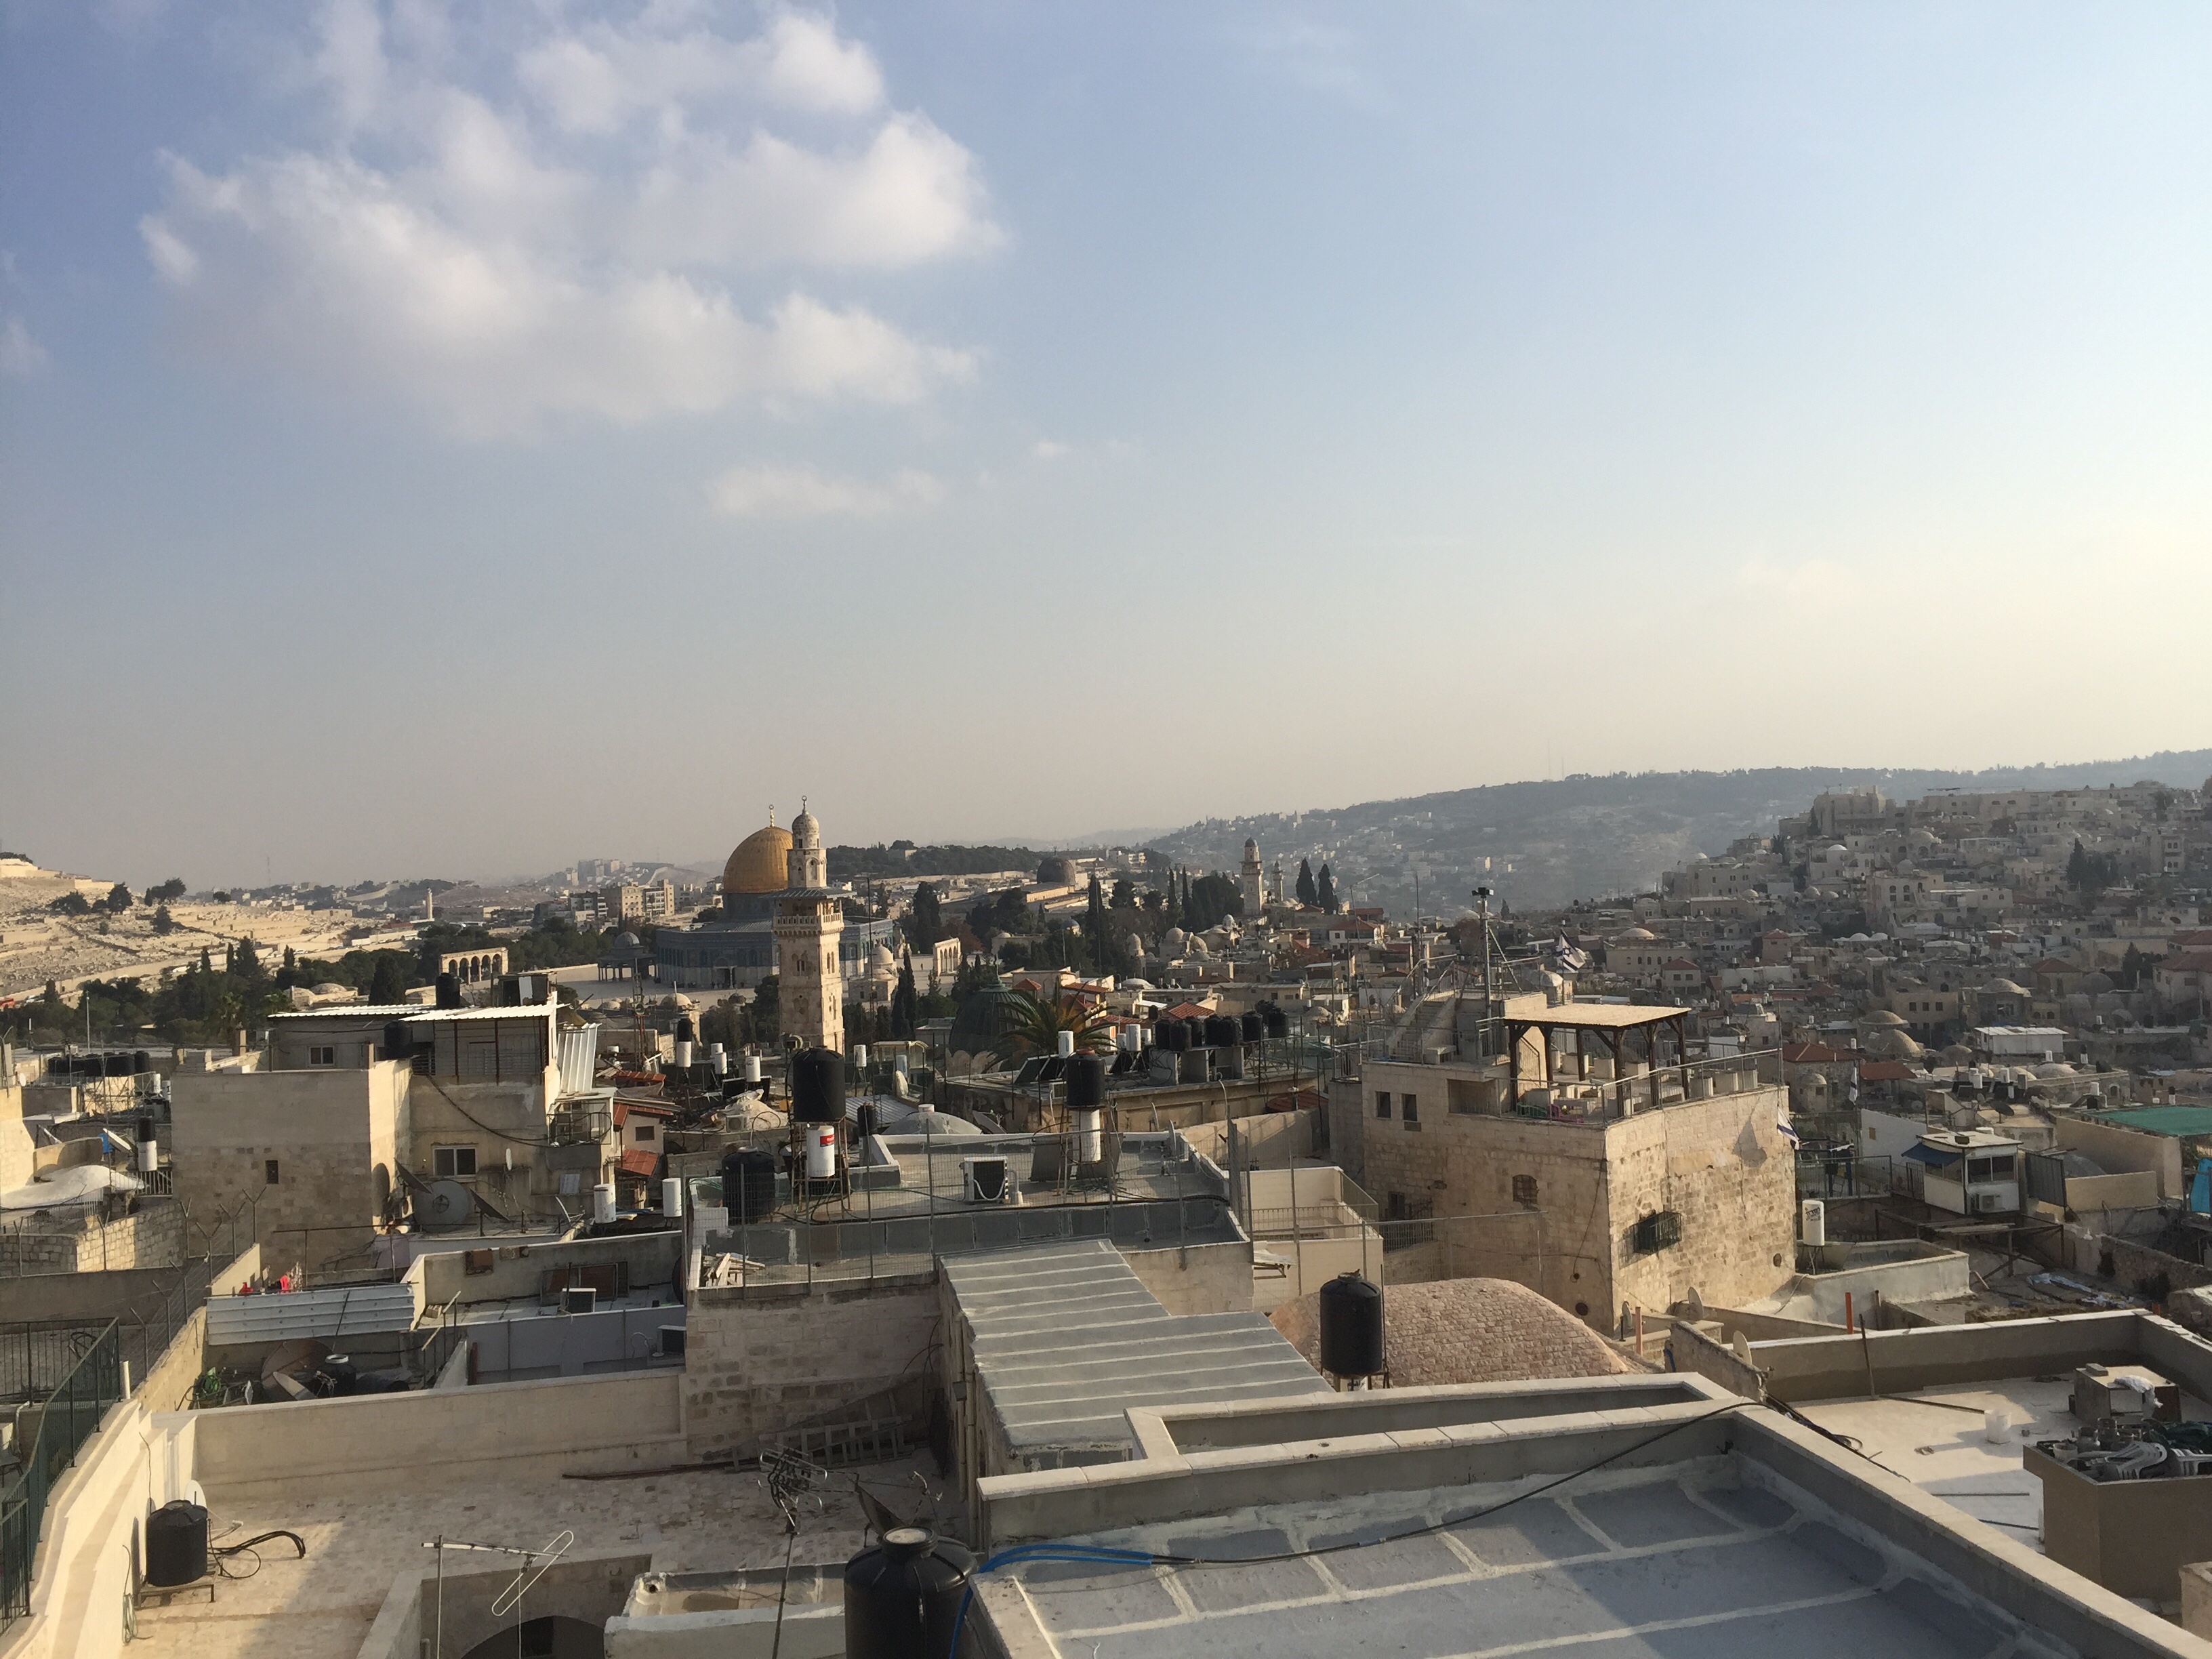 Rebekah Stevens in Israel: More great views from Jewish complex in the Muslim quarter